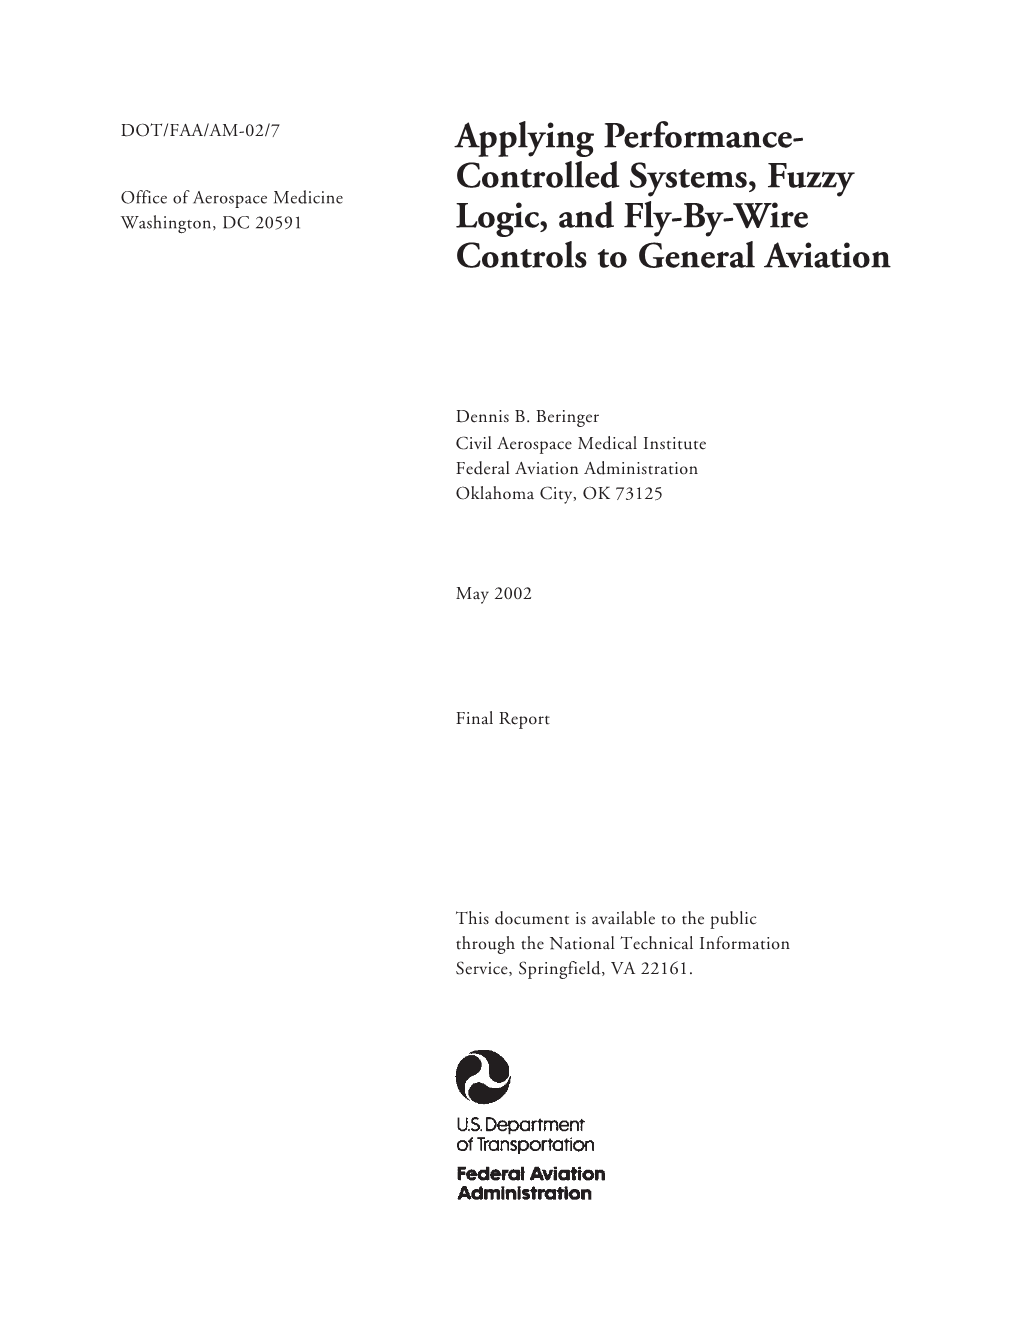 Applying Performance- Controlled Systems, Fuzzy Logic, and Fly-By